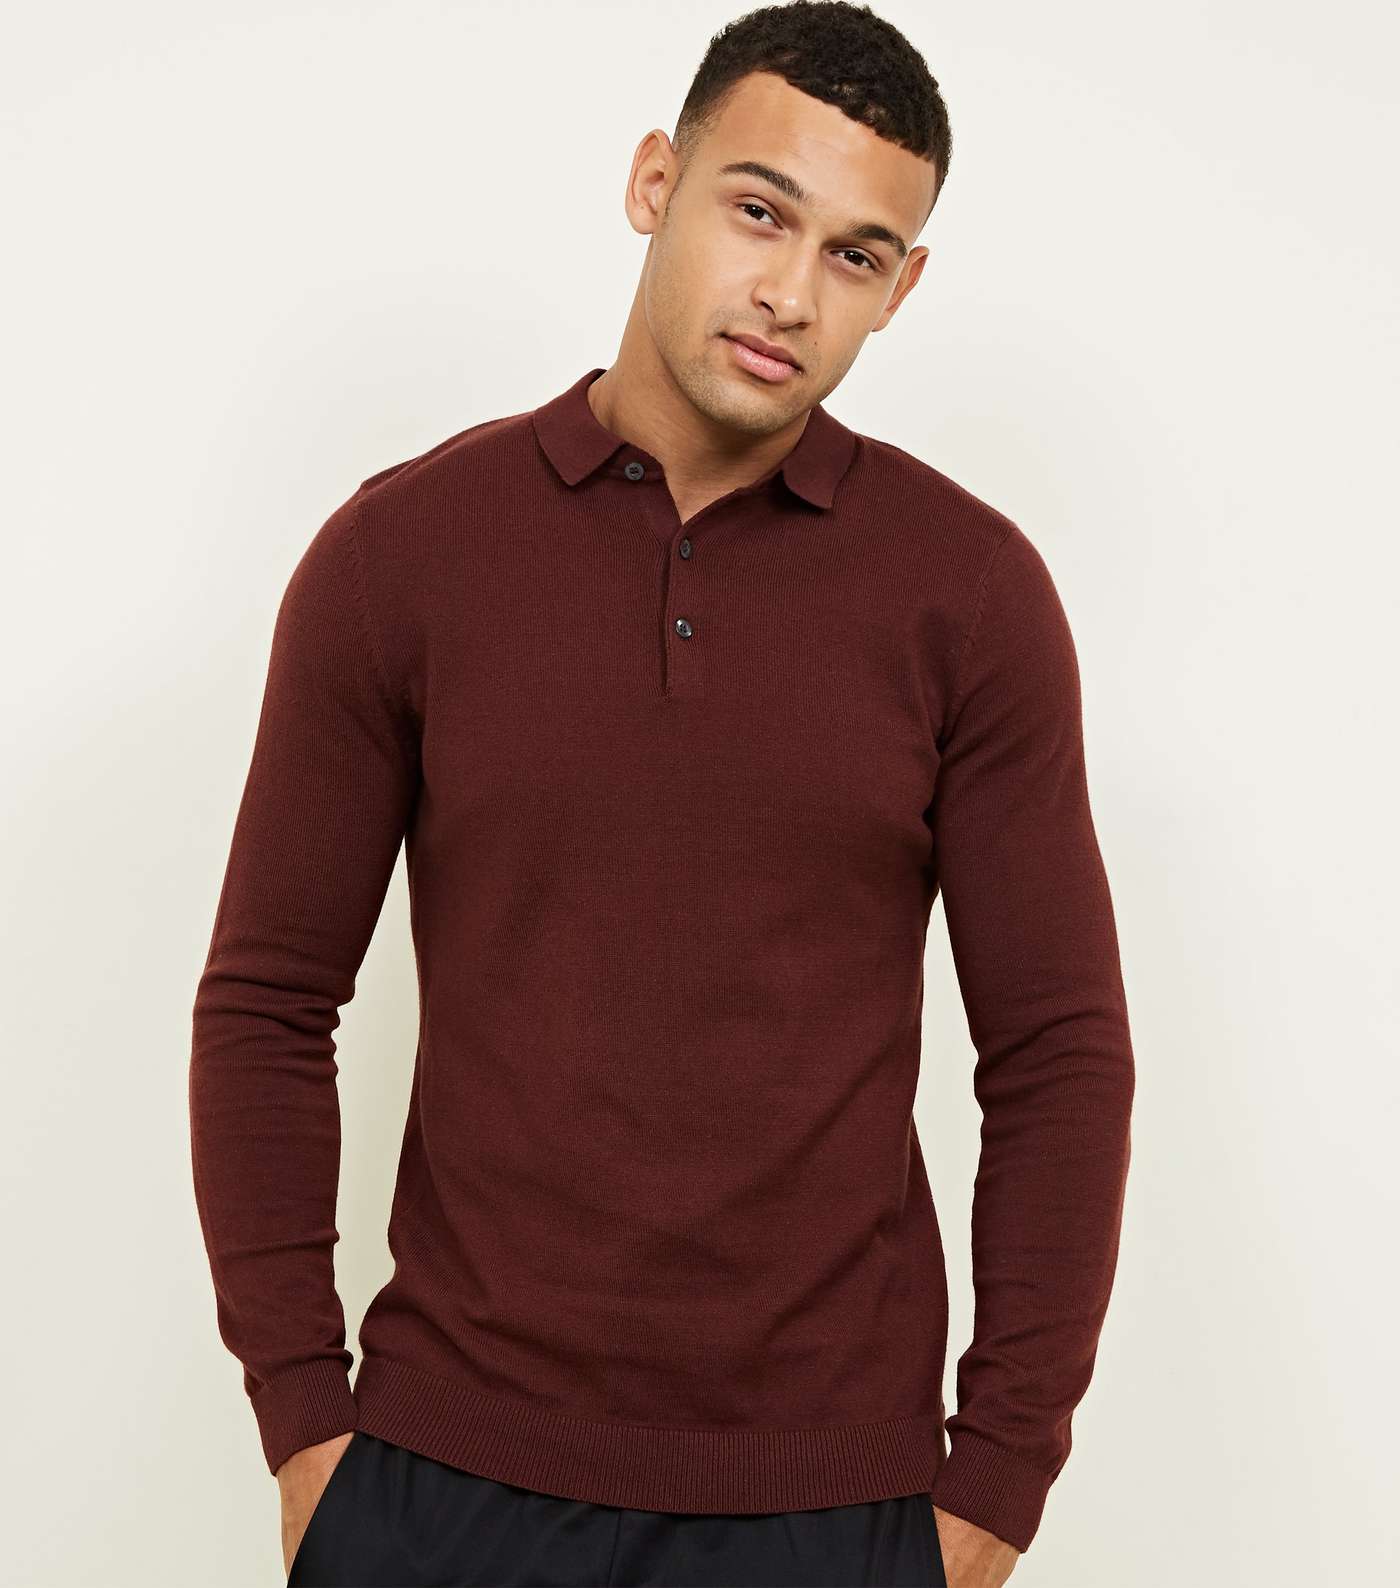 Burgundy Muscle Fit Long Sleeve Knit Polo Shirt